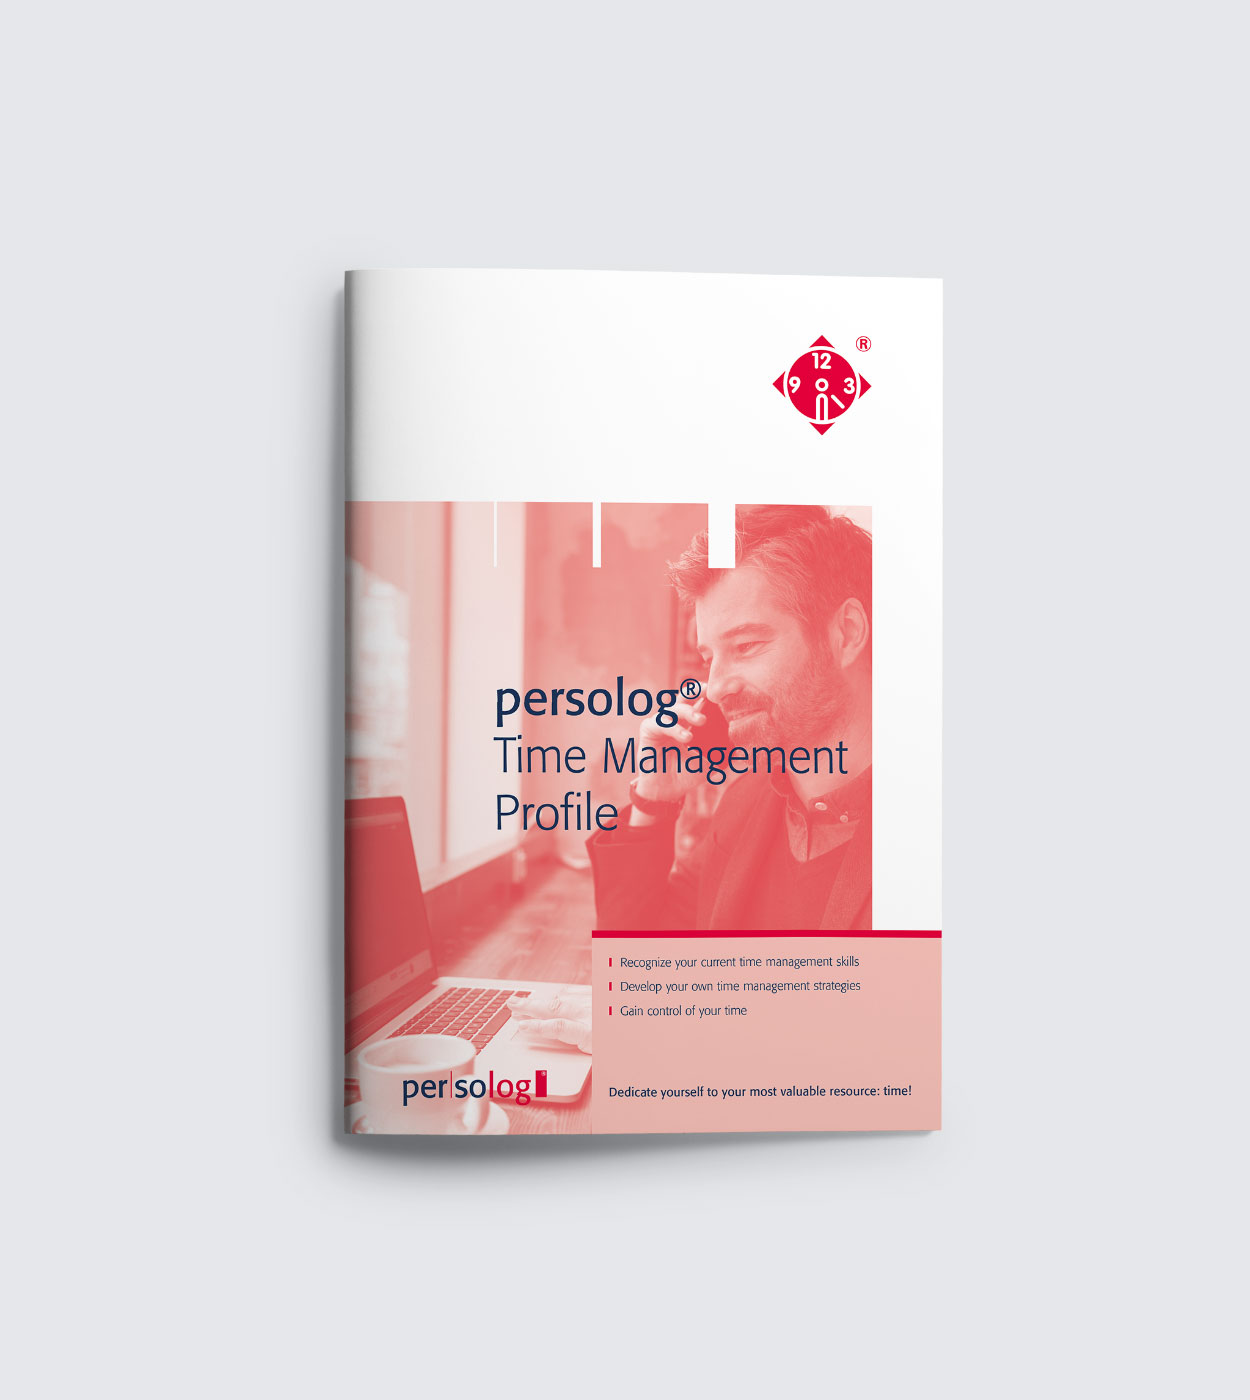 persolog® Time Management Profile